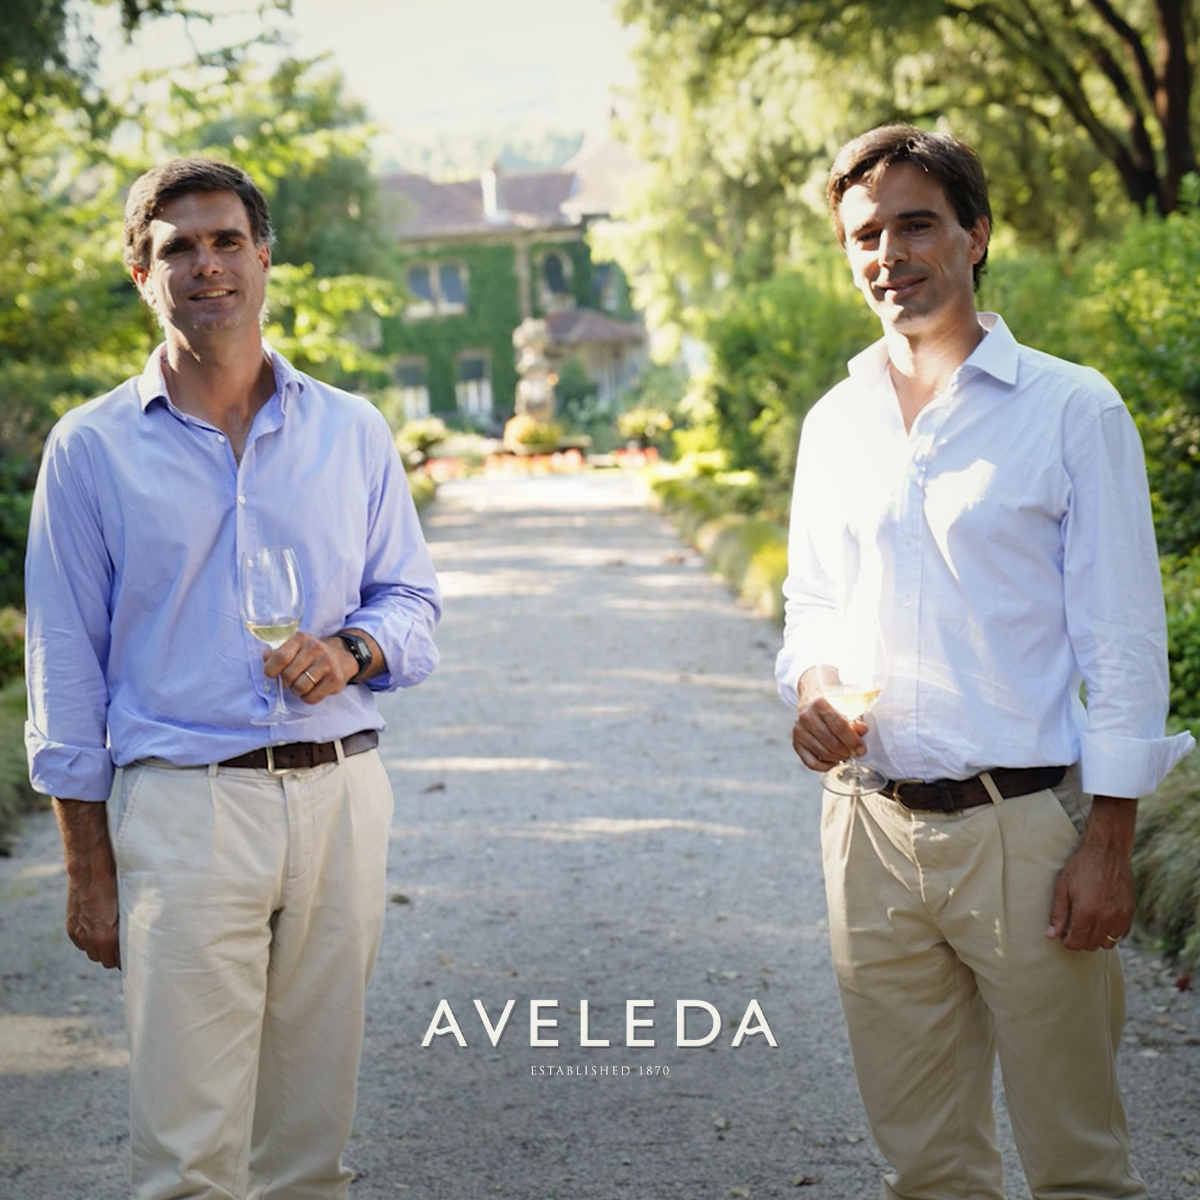 Aveleda named European Winery of the Year by Wine Enthusiast